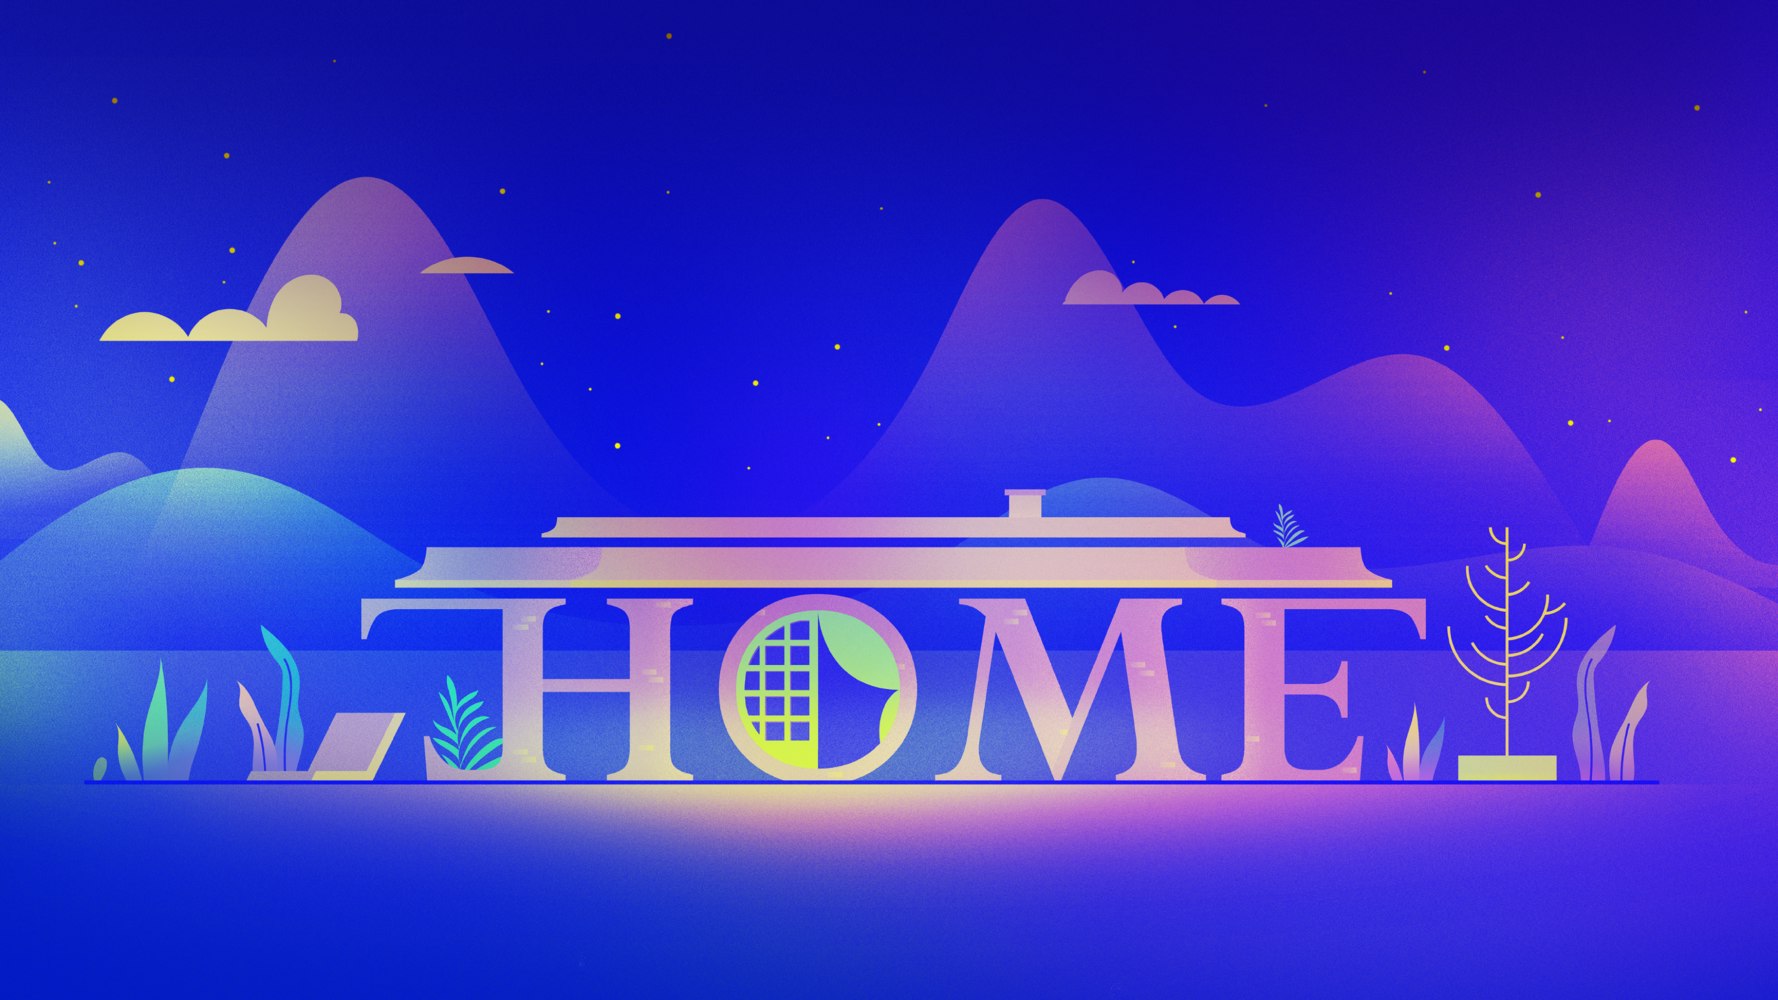 The word Home forming the outline of a house, with mountains in the background